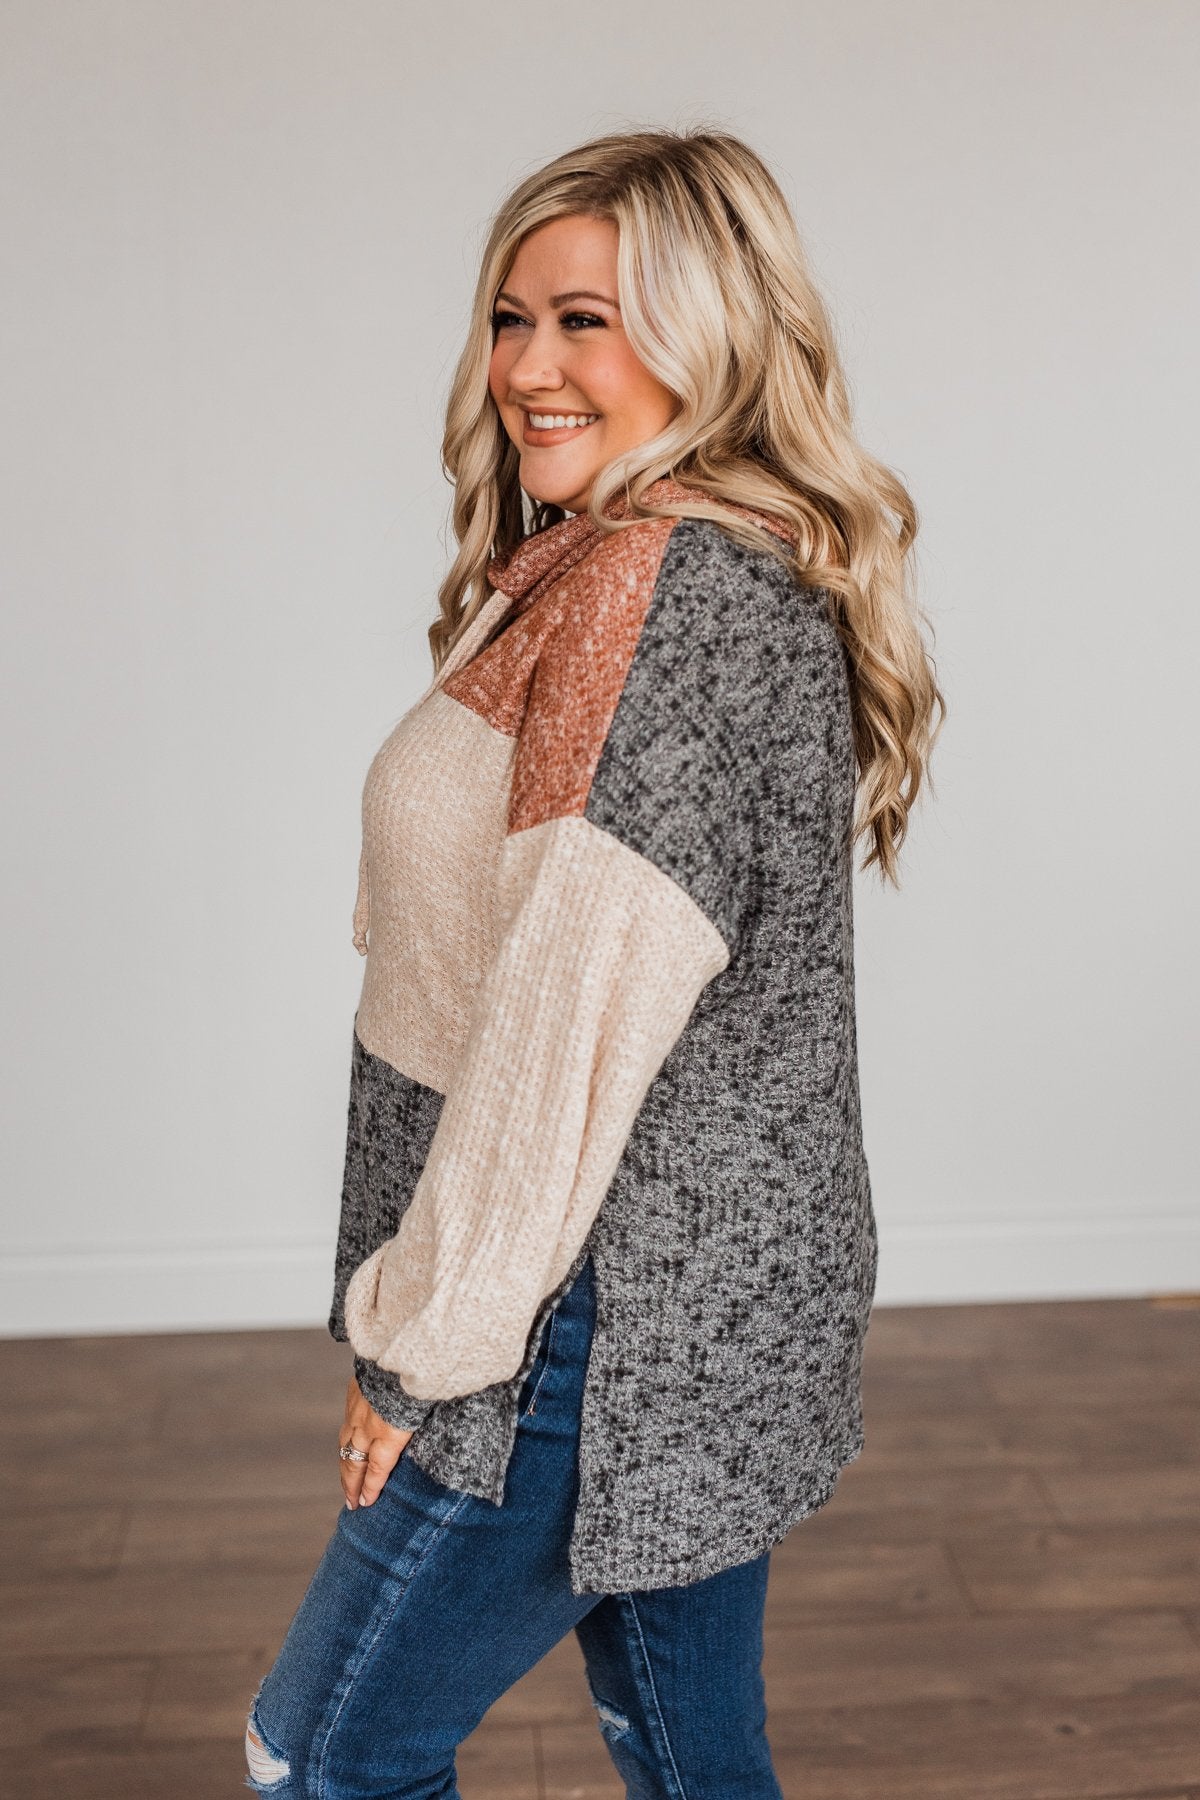 Flawless Looks Cowl Neck Top- Rust, Beige & Charcoal